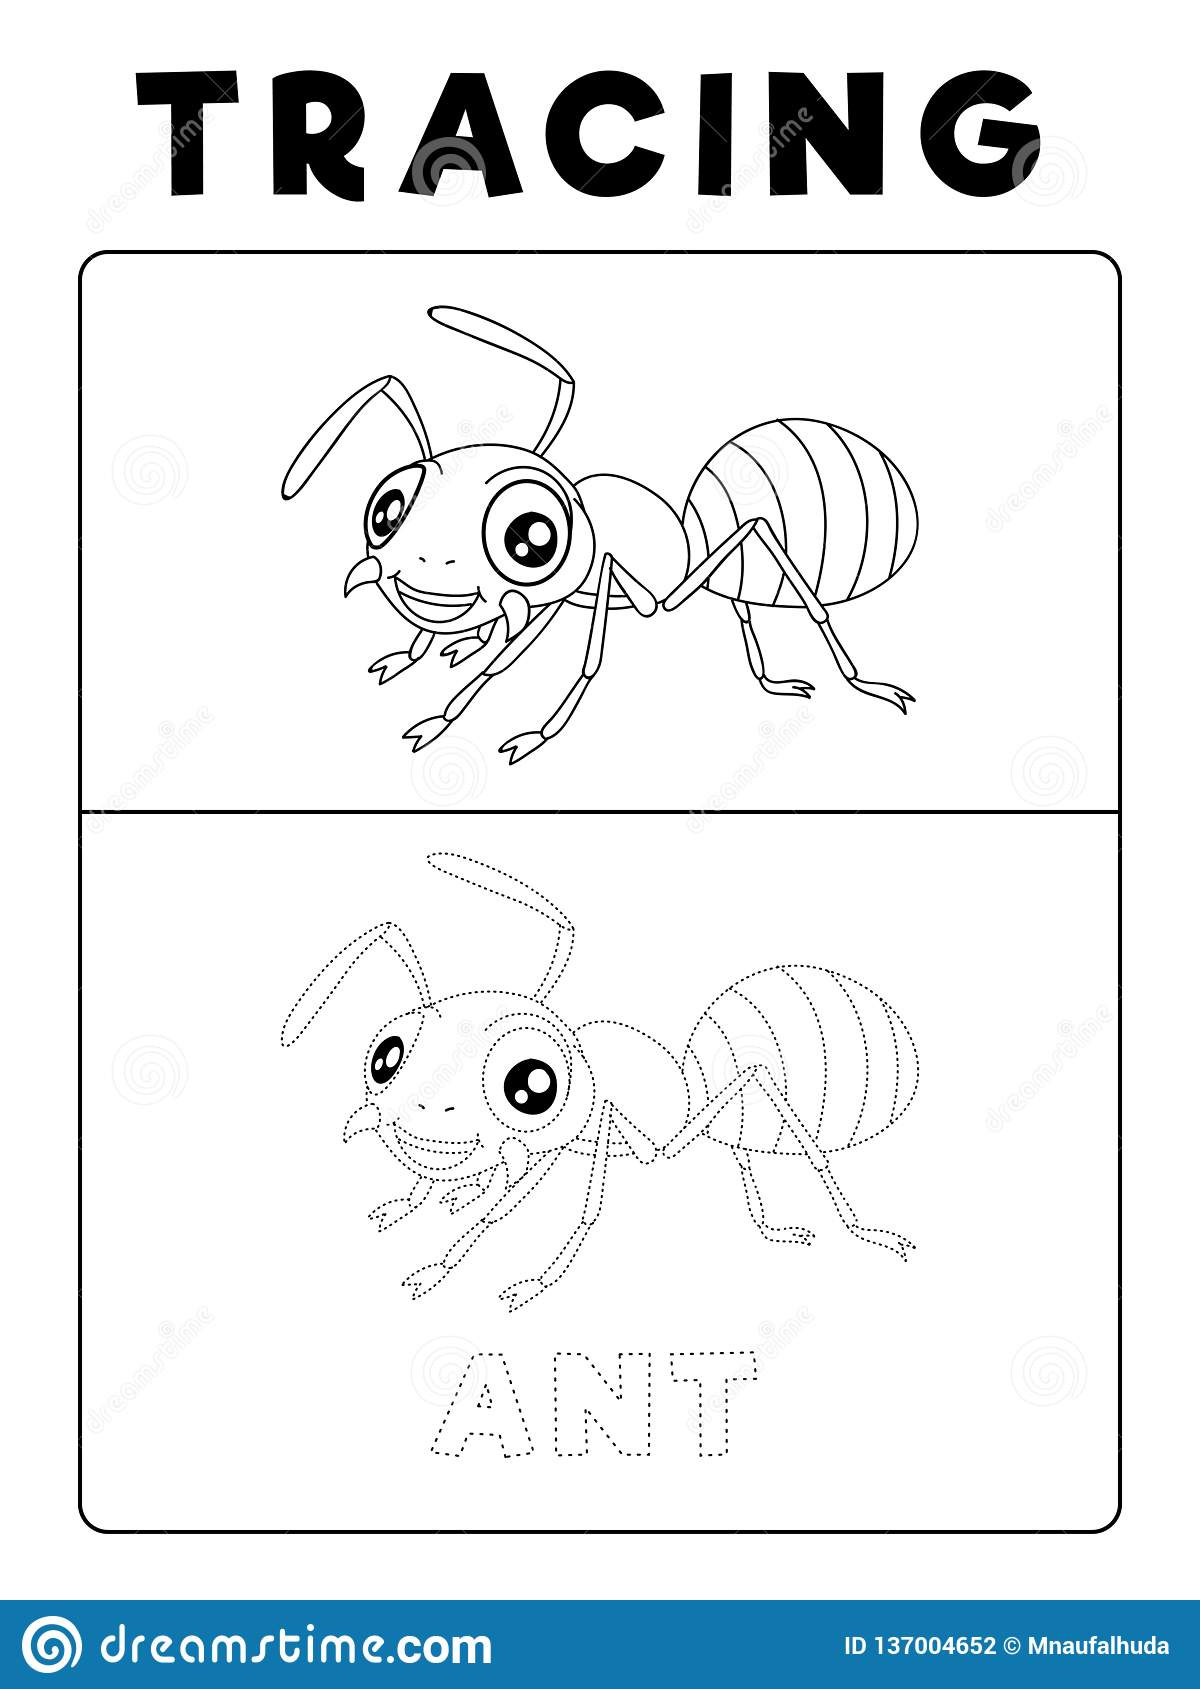 Bug Worksheets for Preschool Funny Ant Insect Animal Tracing Book with Example Preschool